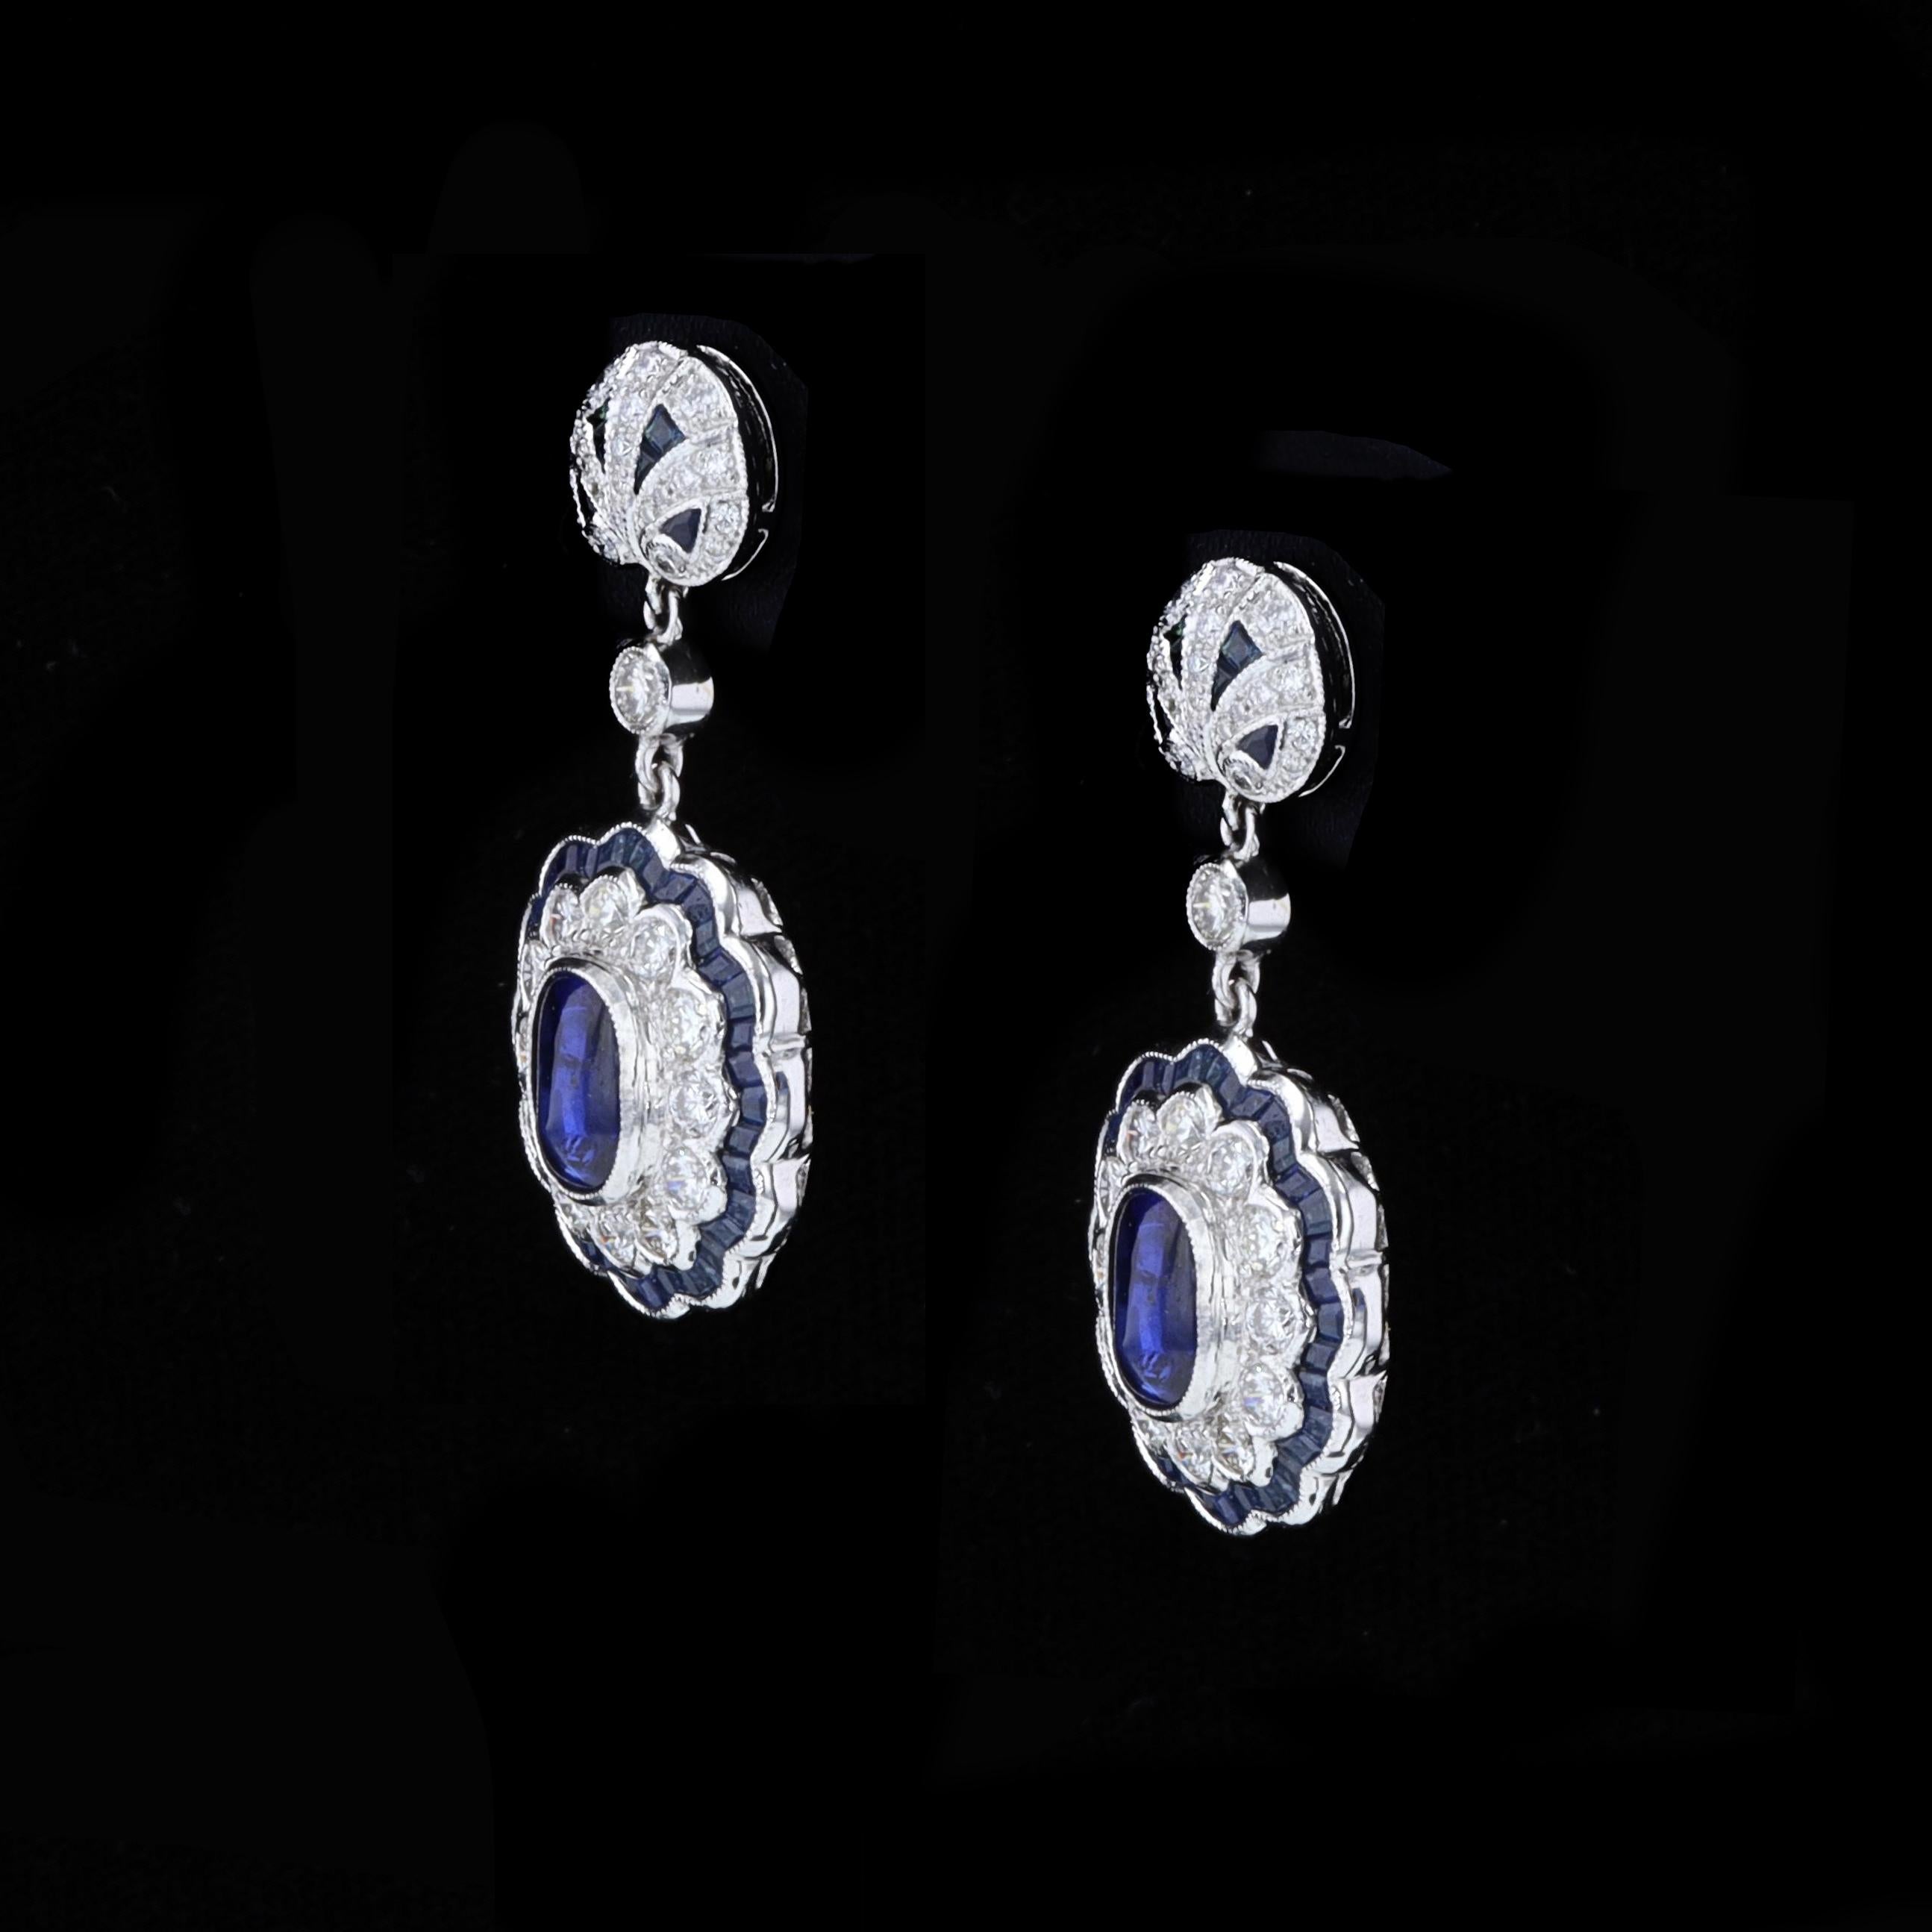 The earrings feature lovely sugarloaf cut sapphires that weigh approximately 3.17ct. The sapphires are accentuated by sparkling round cut diamonds that weigh approximately 2.33ct. The color of these diamonds is G-H with VS clarity. The earrings are